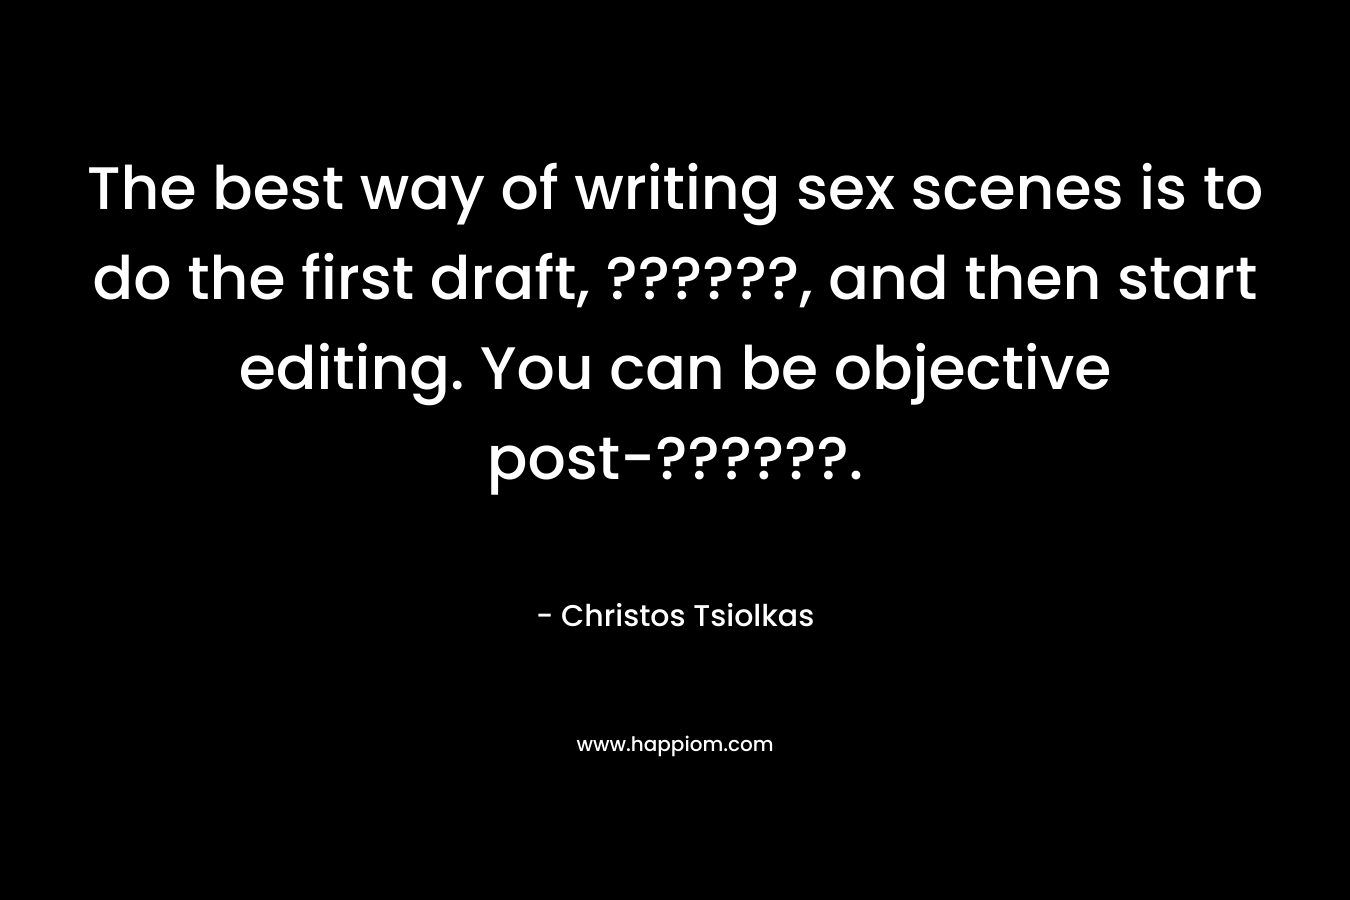 The best way of writing sex scenes is to do the first draft, ??????, and then start editing. You can be objective post-??????.